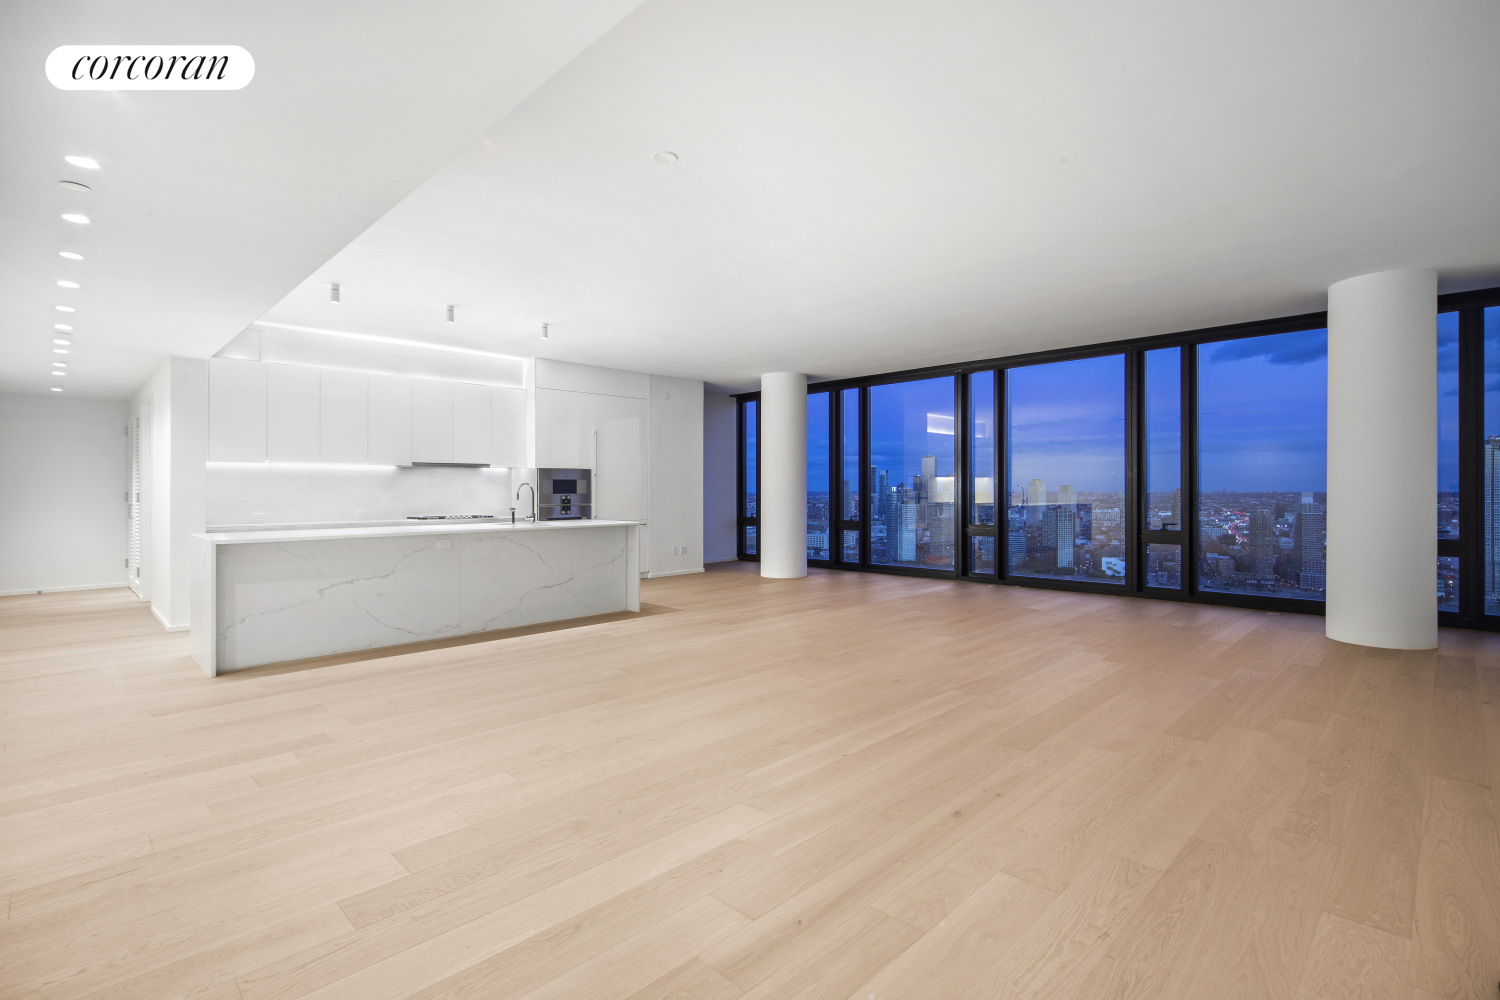 695 1st Avenue 42A, Murray Hill, Midtown East, NYC - 4 Bedrooms  
4.5 Bathrooms  
6 Rooms - 